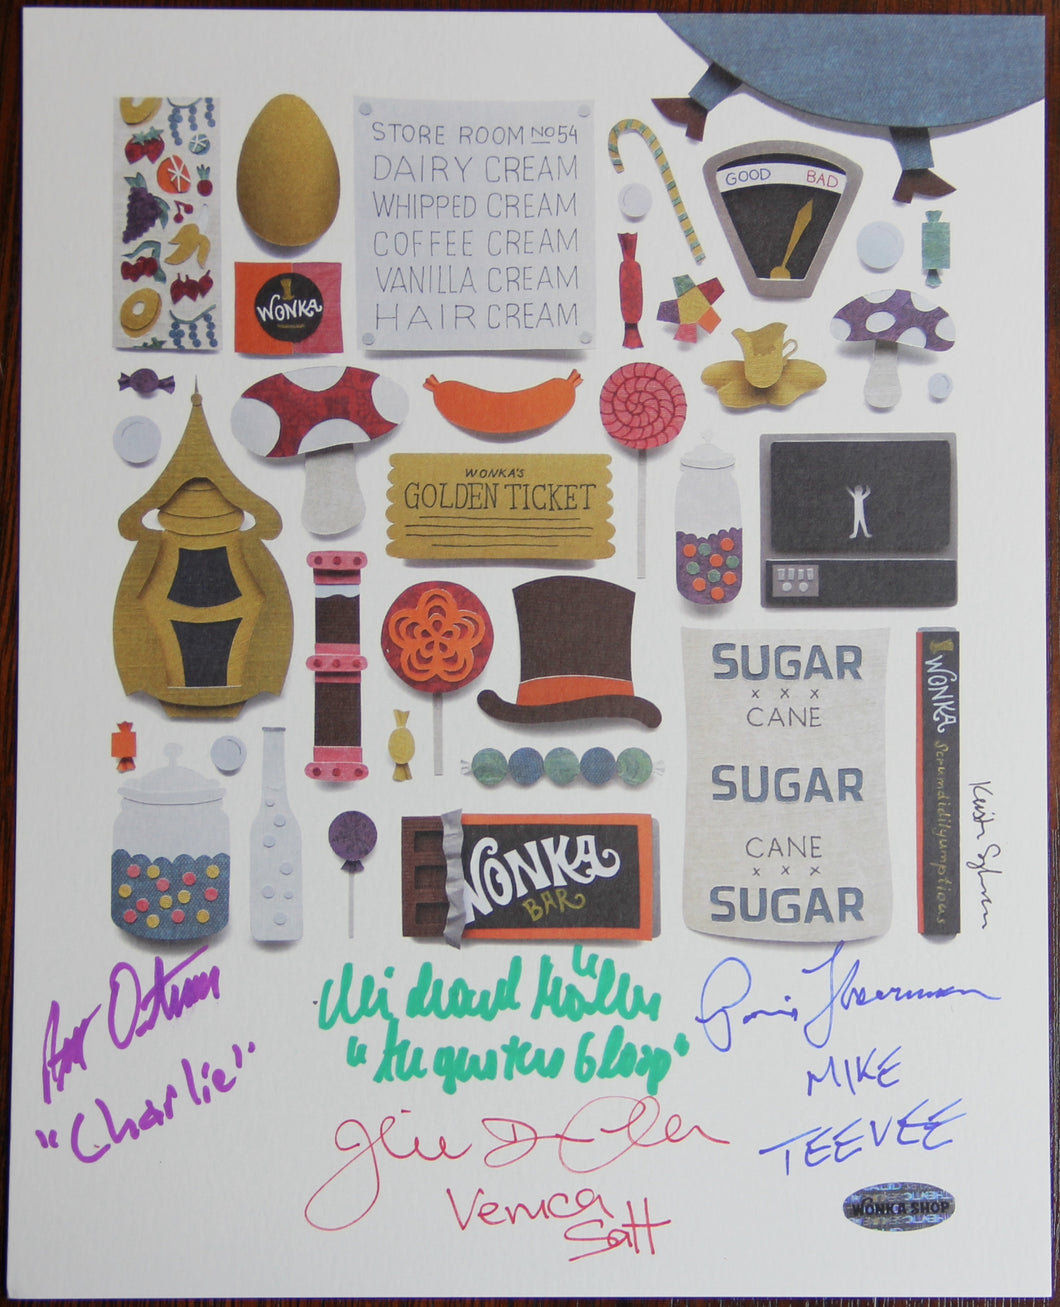 8” X 10” WONKA COLLAGE BY KRISTEN SGALAMBORO - AUTOGRAPHED BY FOUR